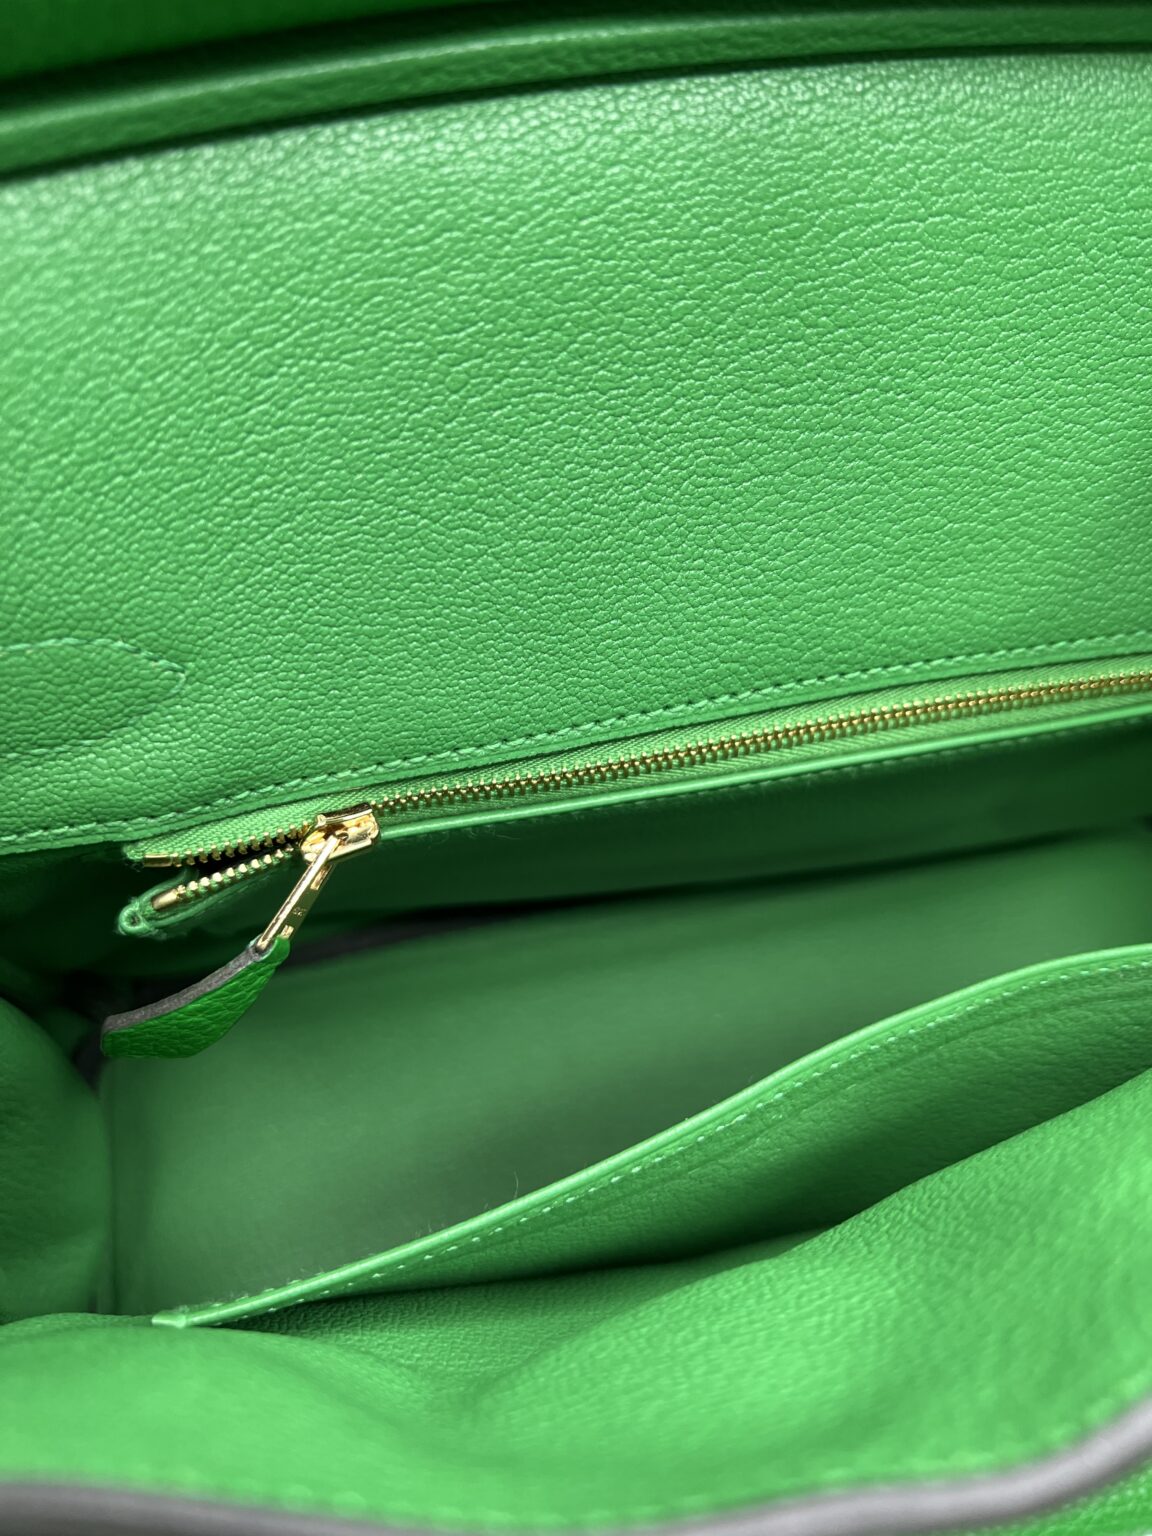 Hermes Birkin 30 with GHW Taurillon Clemence – Lux Edition Au